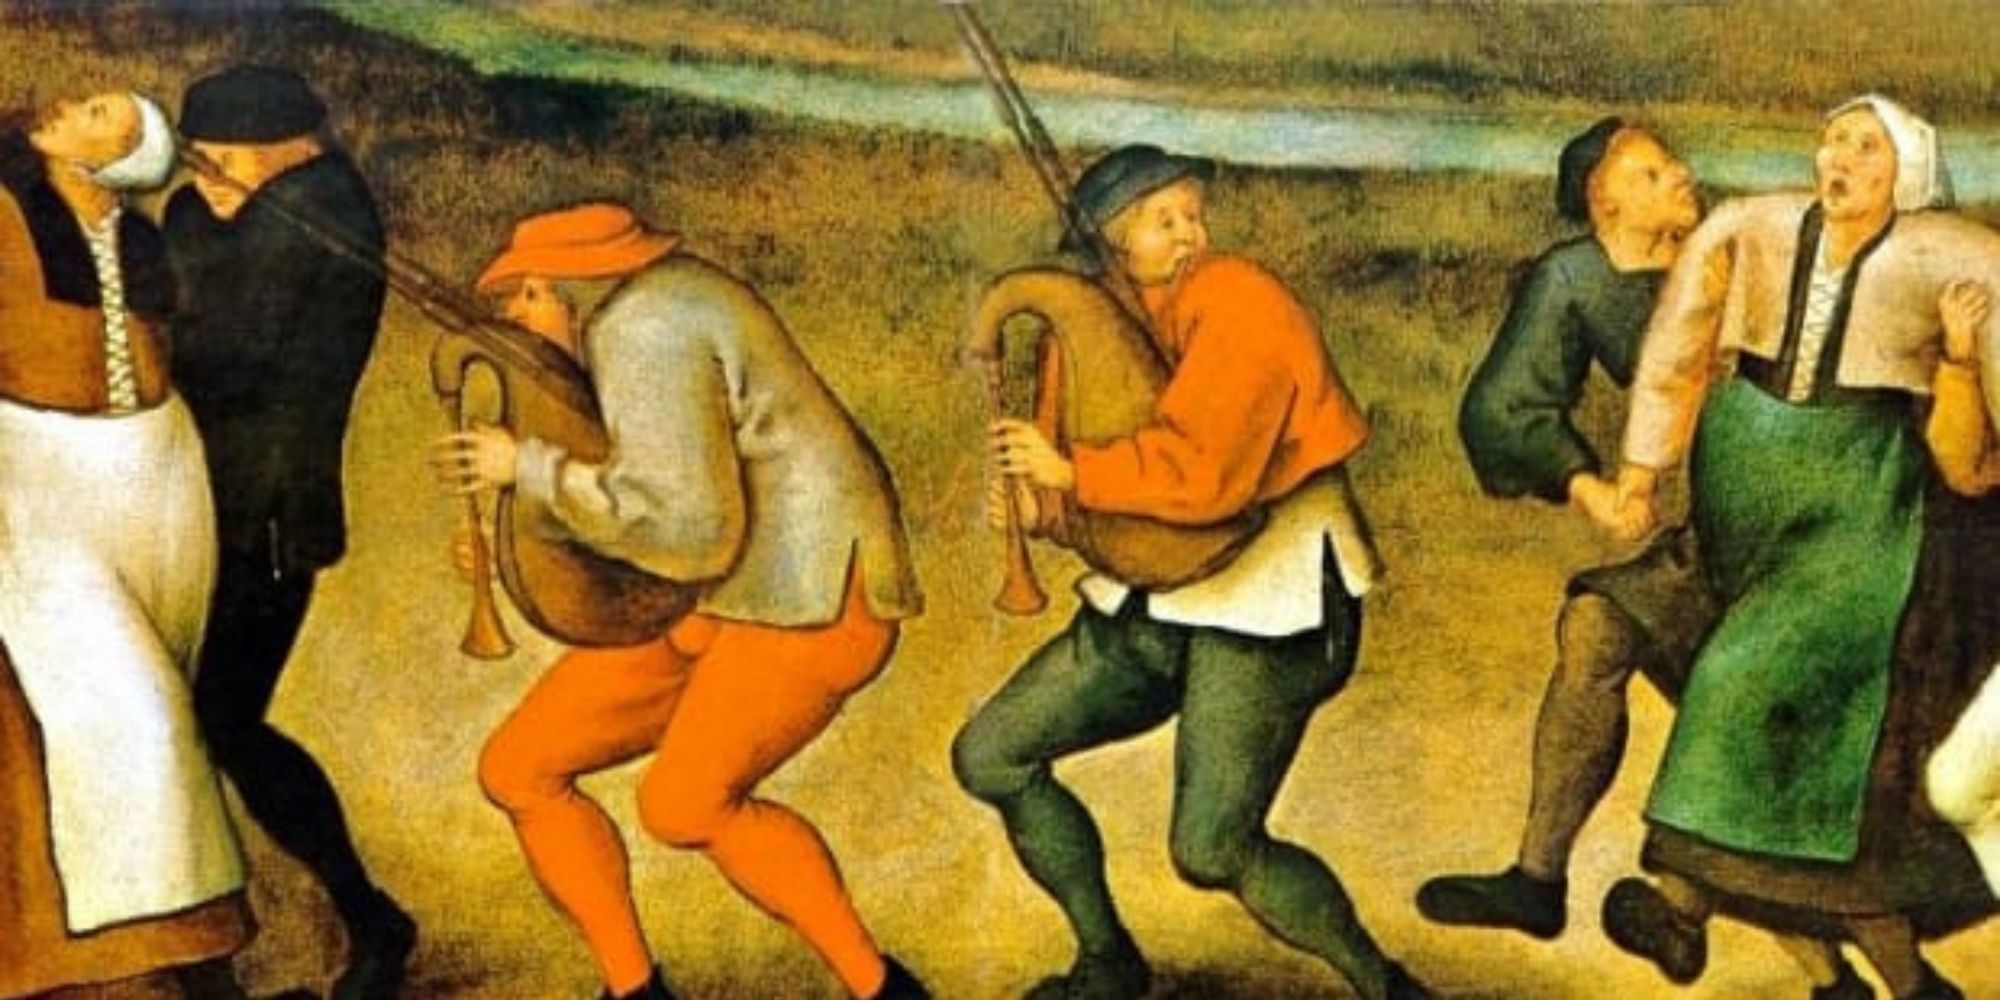 Depiction of the Dancing Plague of 1518